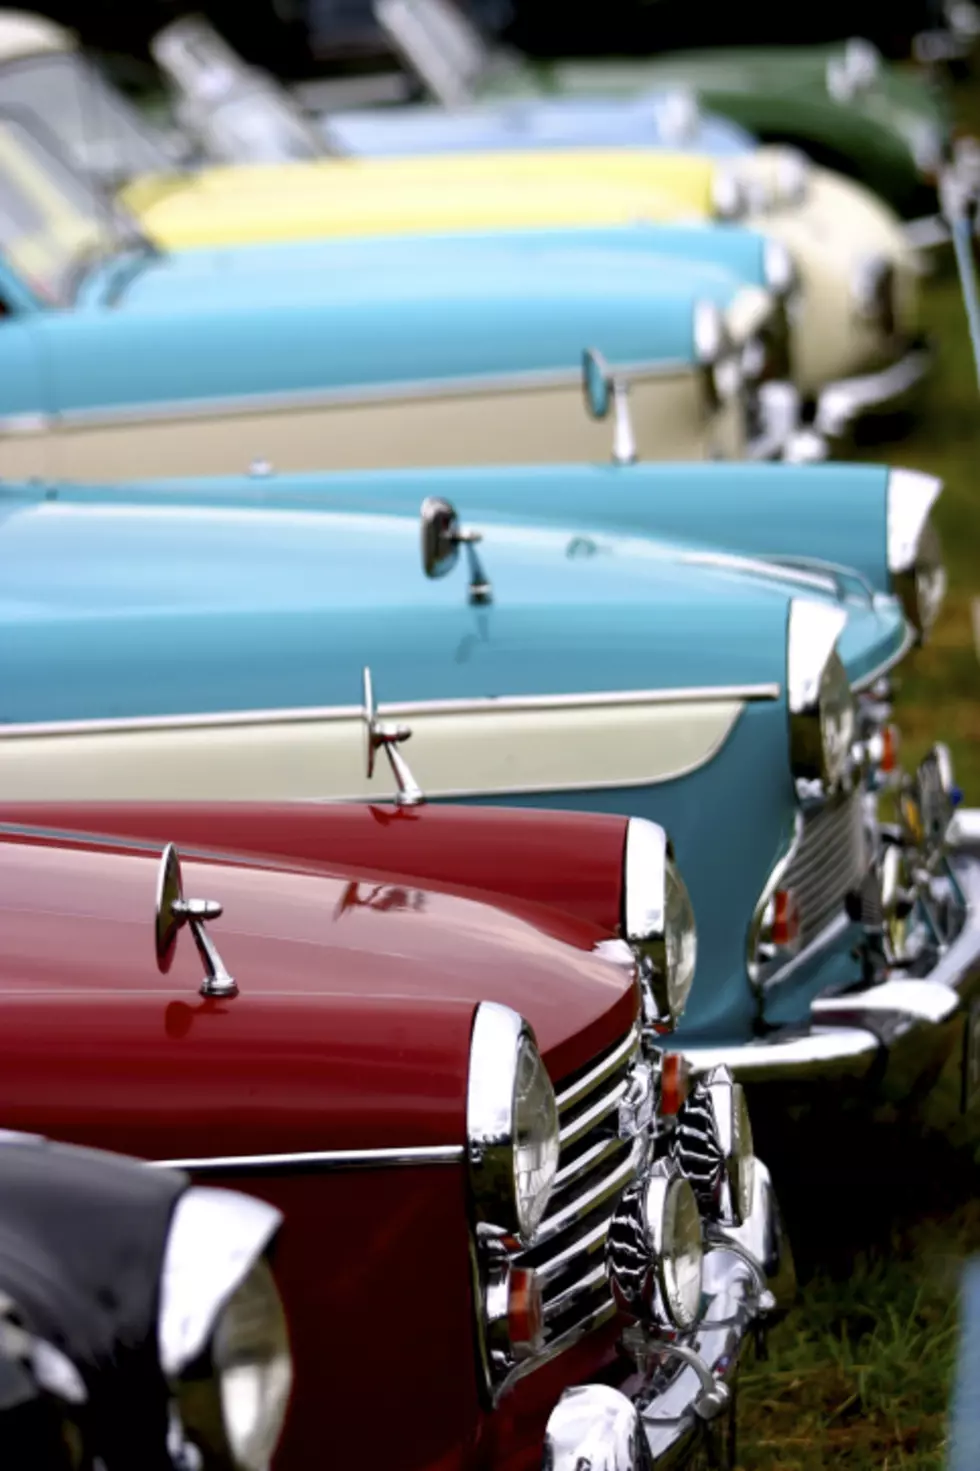 An Annual Car Show is Happening in Monticello This Weekend